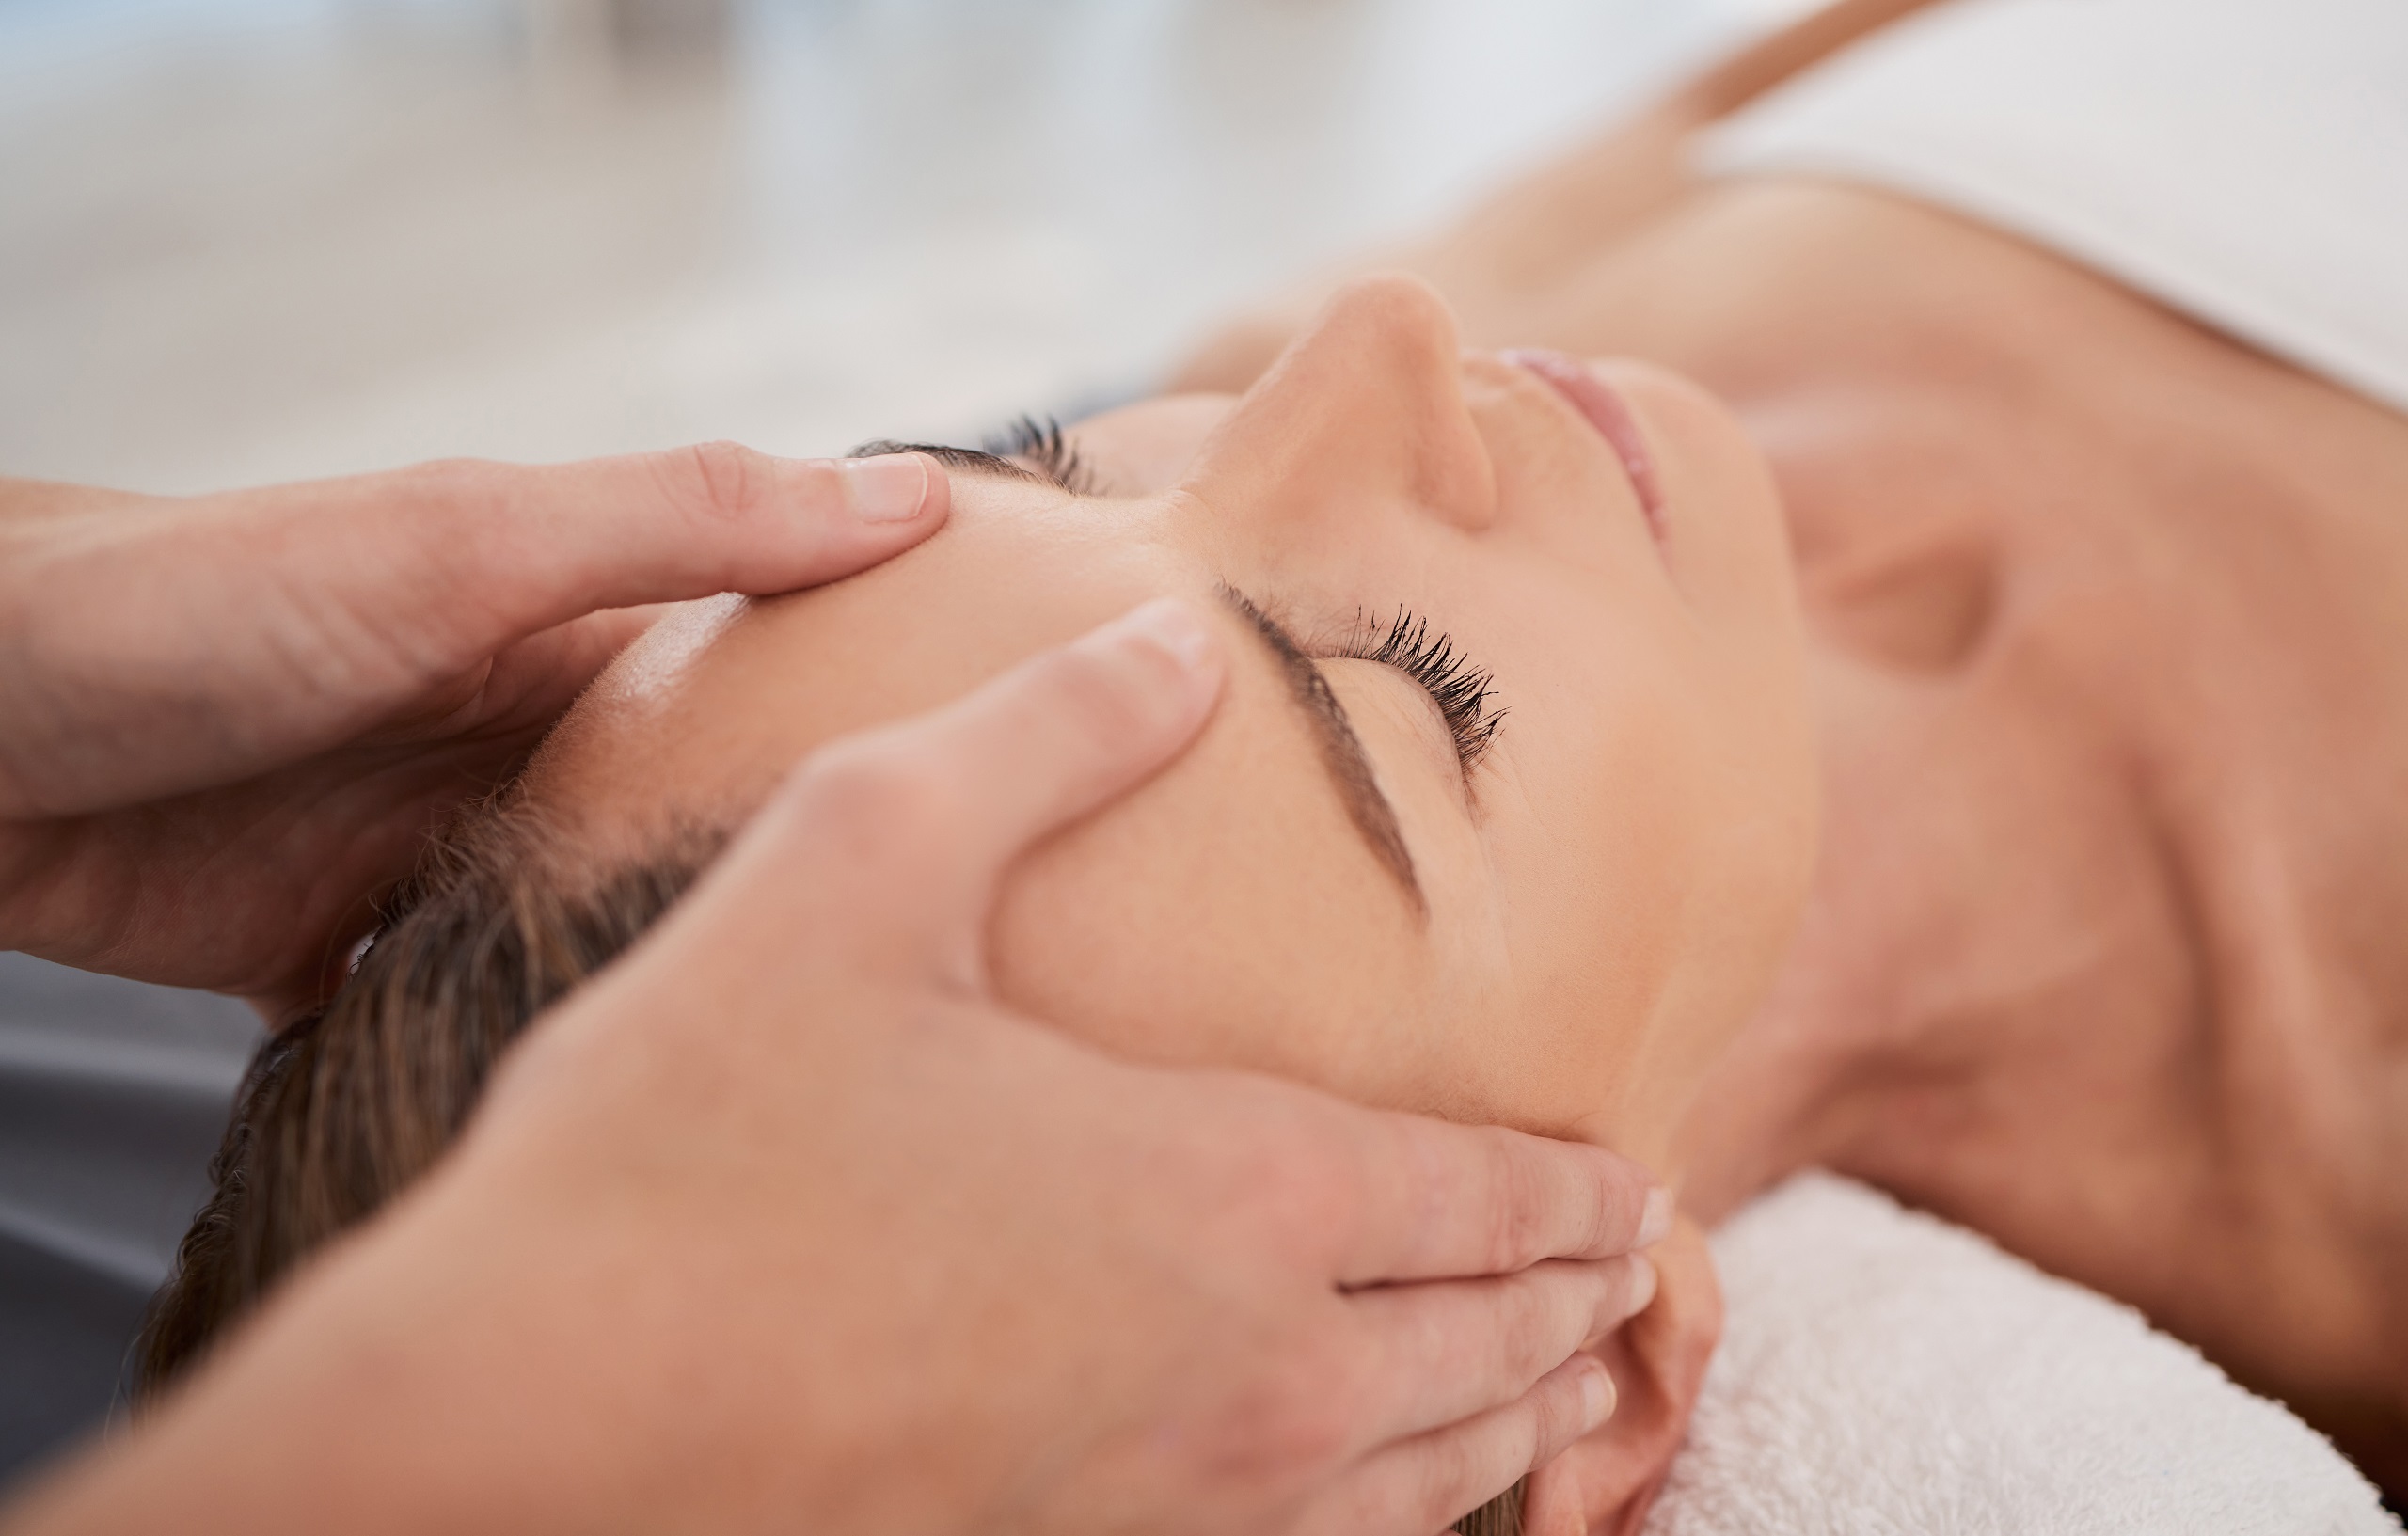 Spa, relax and hands with a head massage for facial wellness, luxury therapy and sleep. Skincare, health and a masseuse massaging temple of a woman at a salon for reflexology and acupressure.